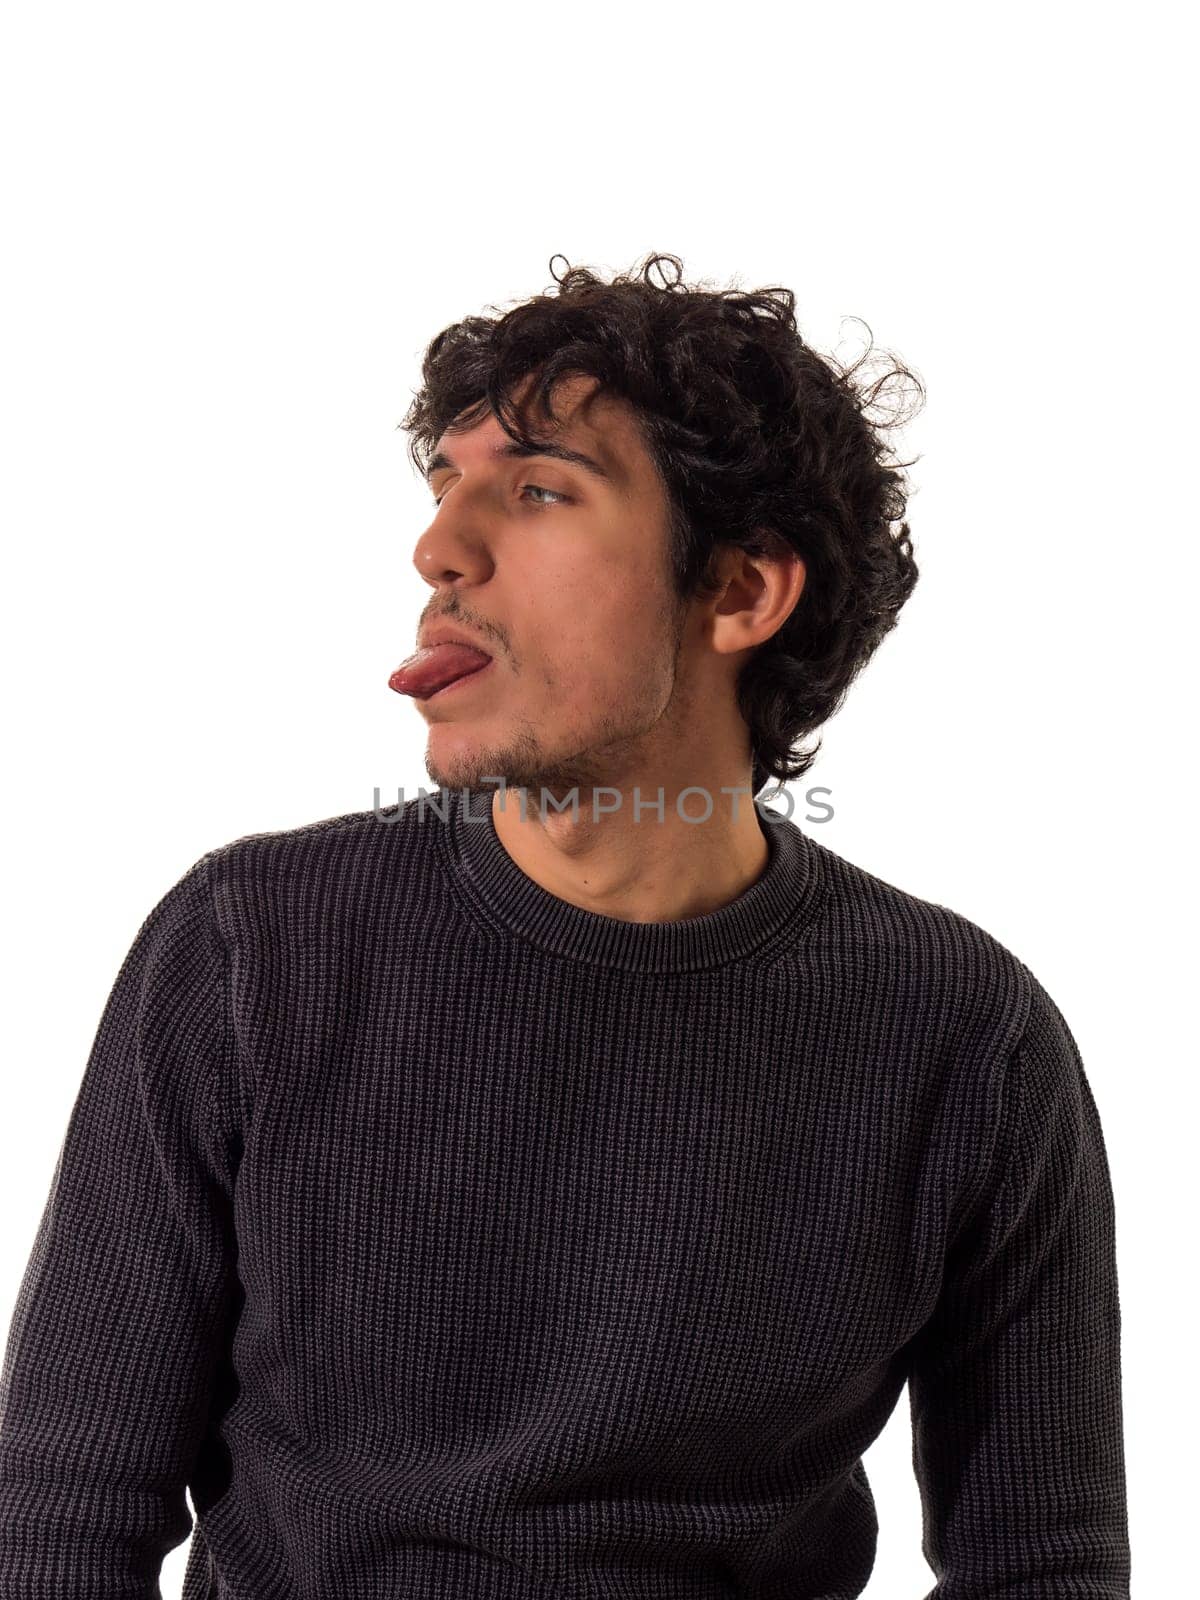 A man making a funny face while sitting down, sticking tongue out, isolated on white background